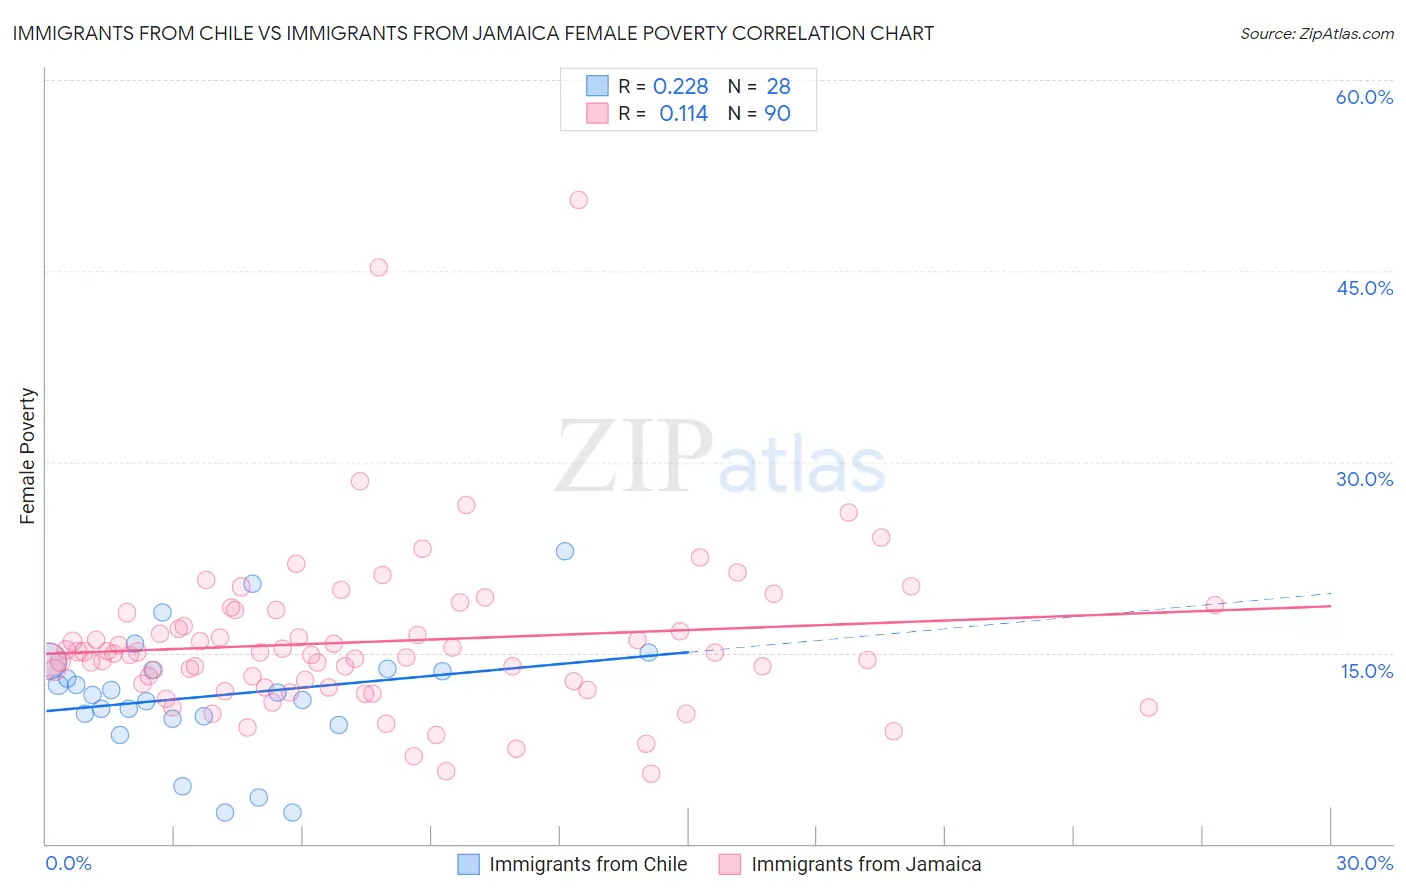 Immigrants from Chile vs Immigrants from Jamaica Female Poverty